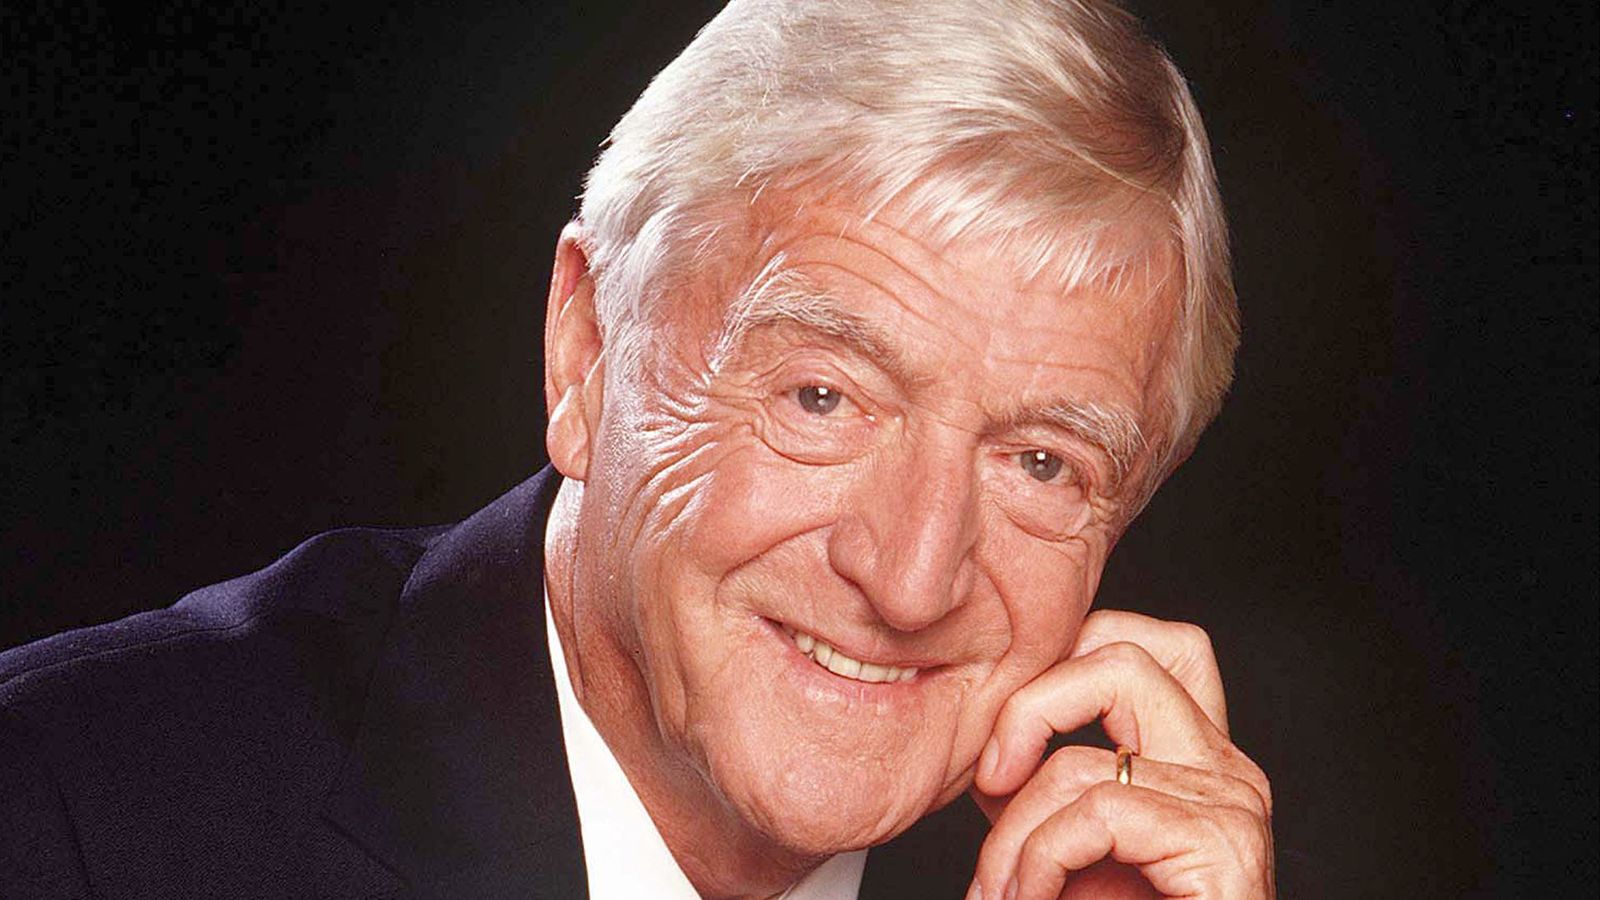 Sir Michael Parkinson, former talk show host and journalist, has died